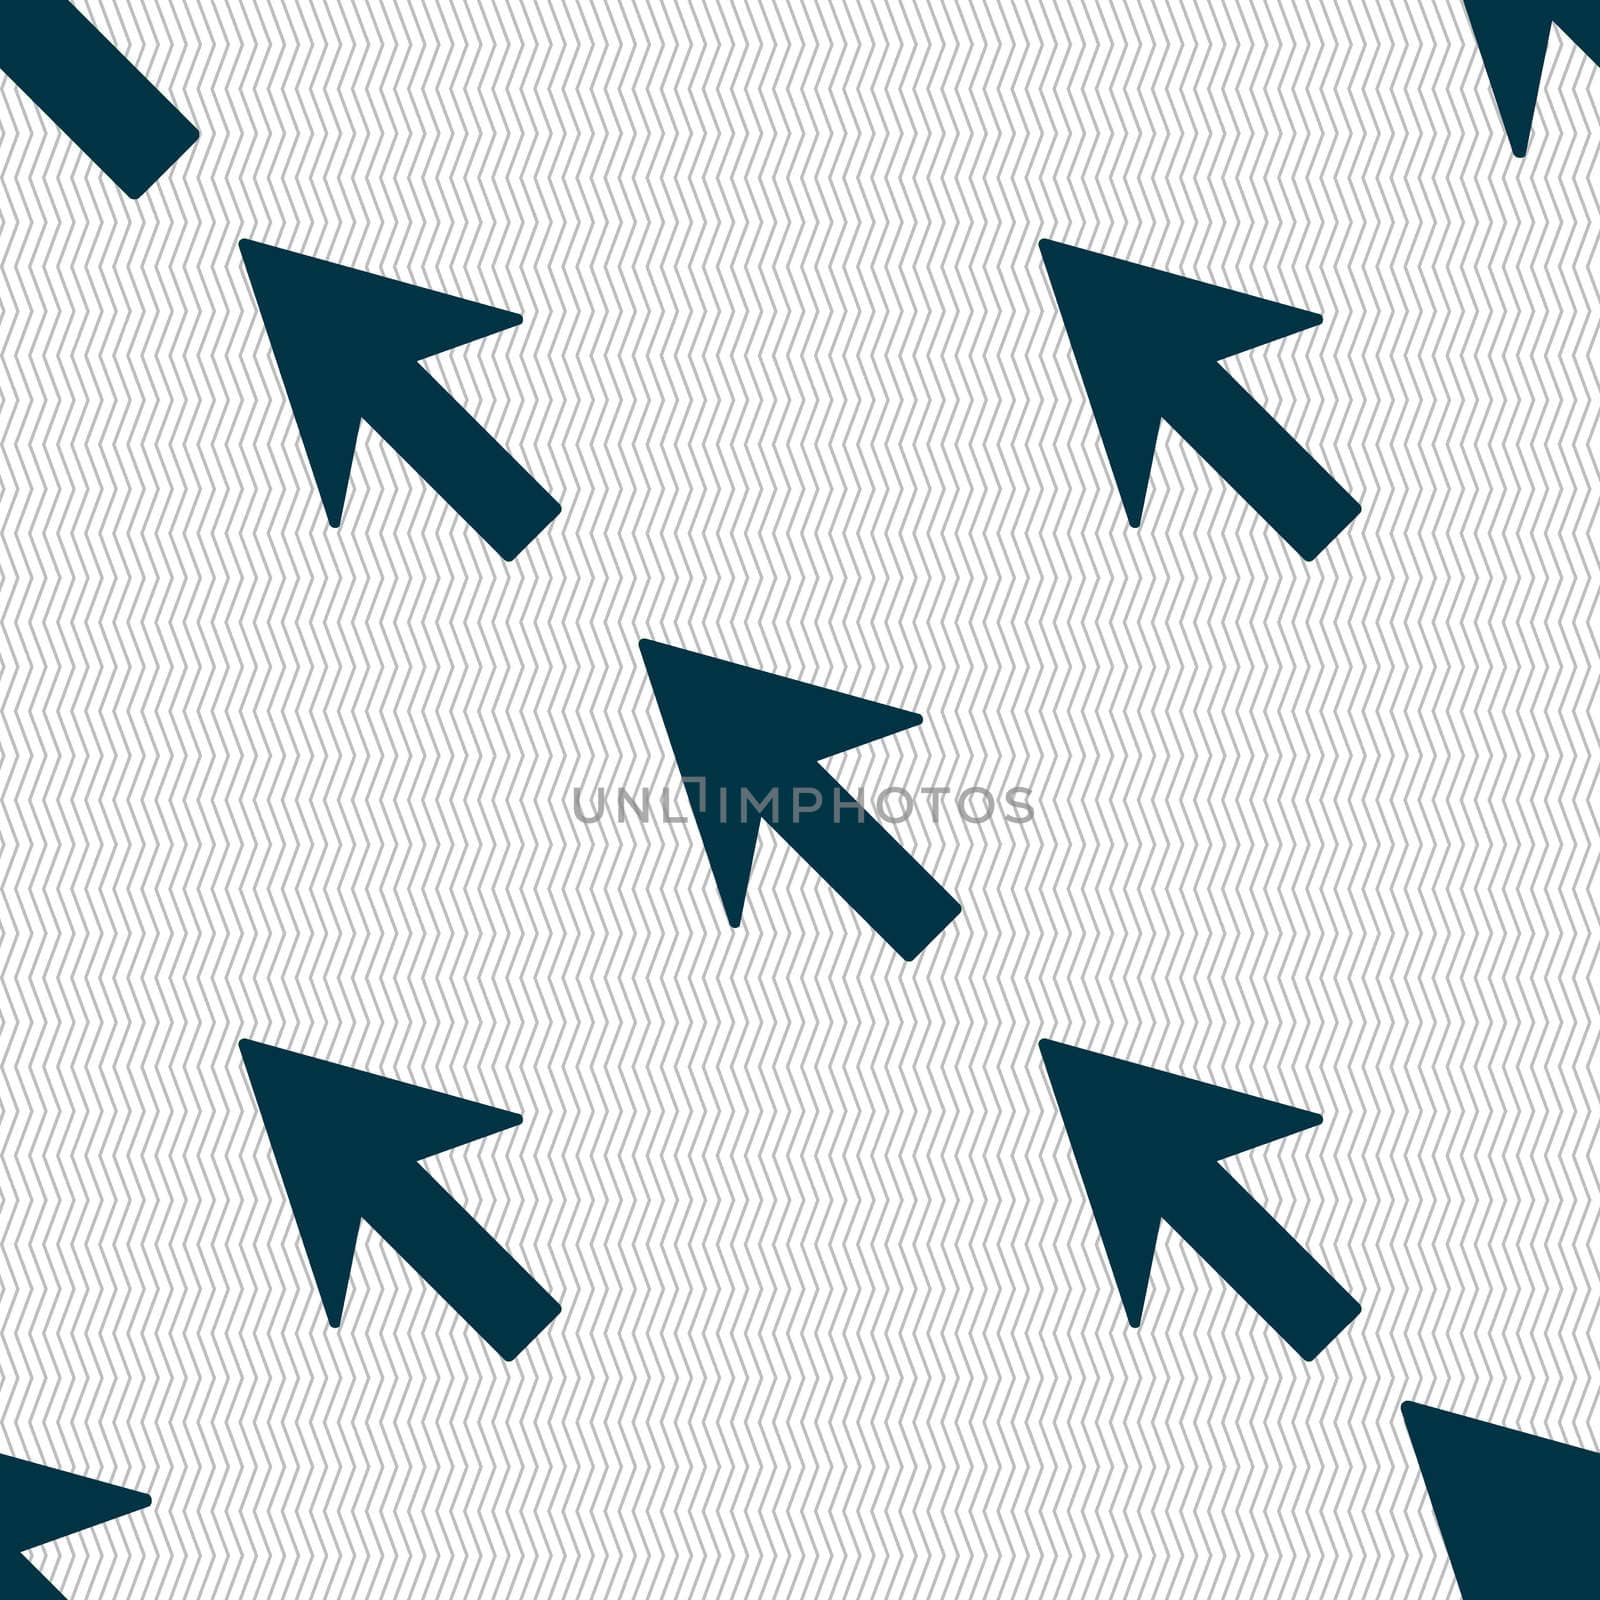 Cursor, arrow icon sign. Seamless abstract background with geometric shapes.  by serhii_lohvyniuk